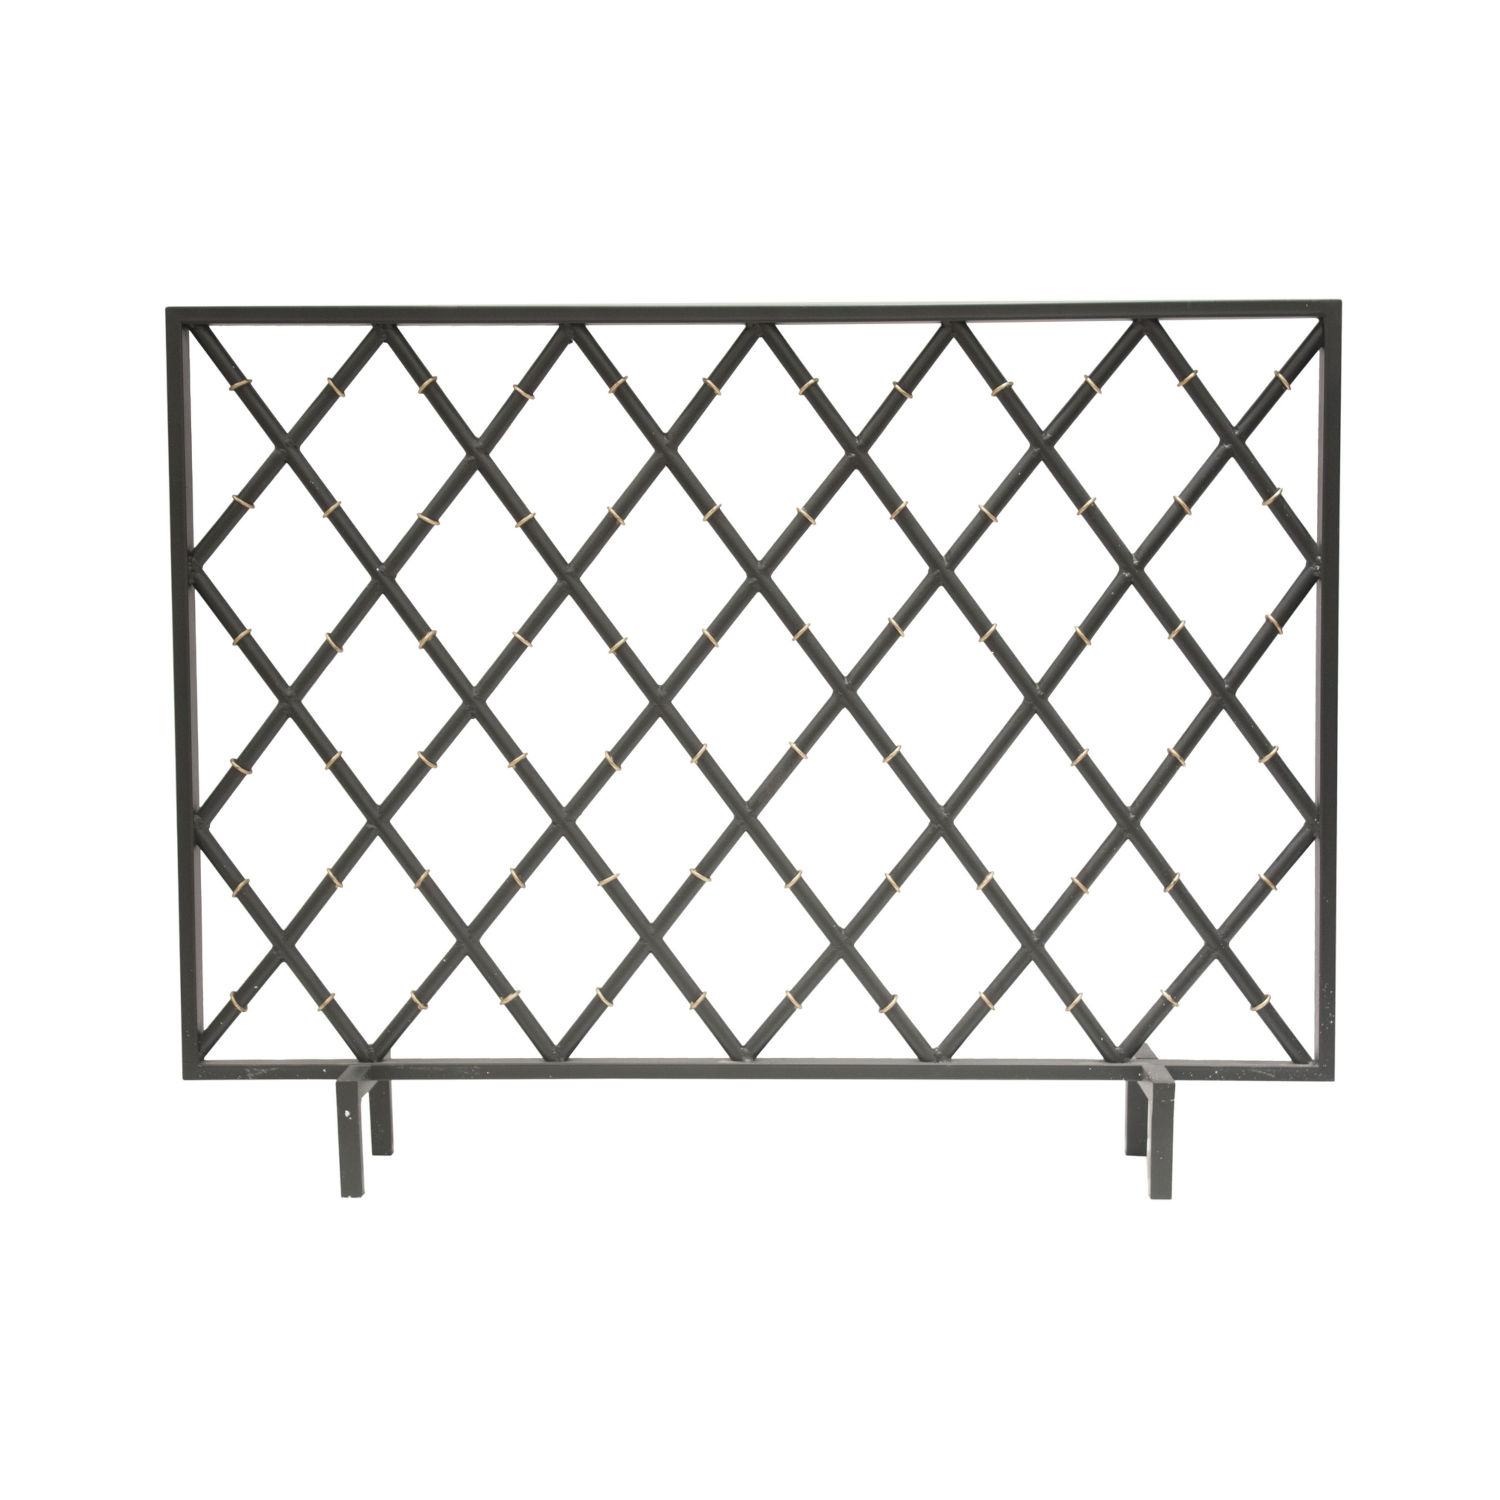 Fireplace Accessories Category